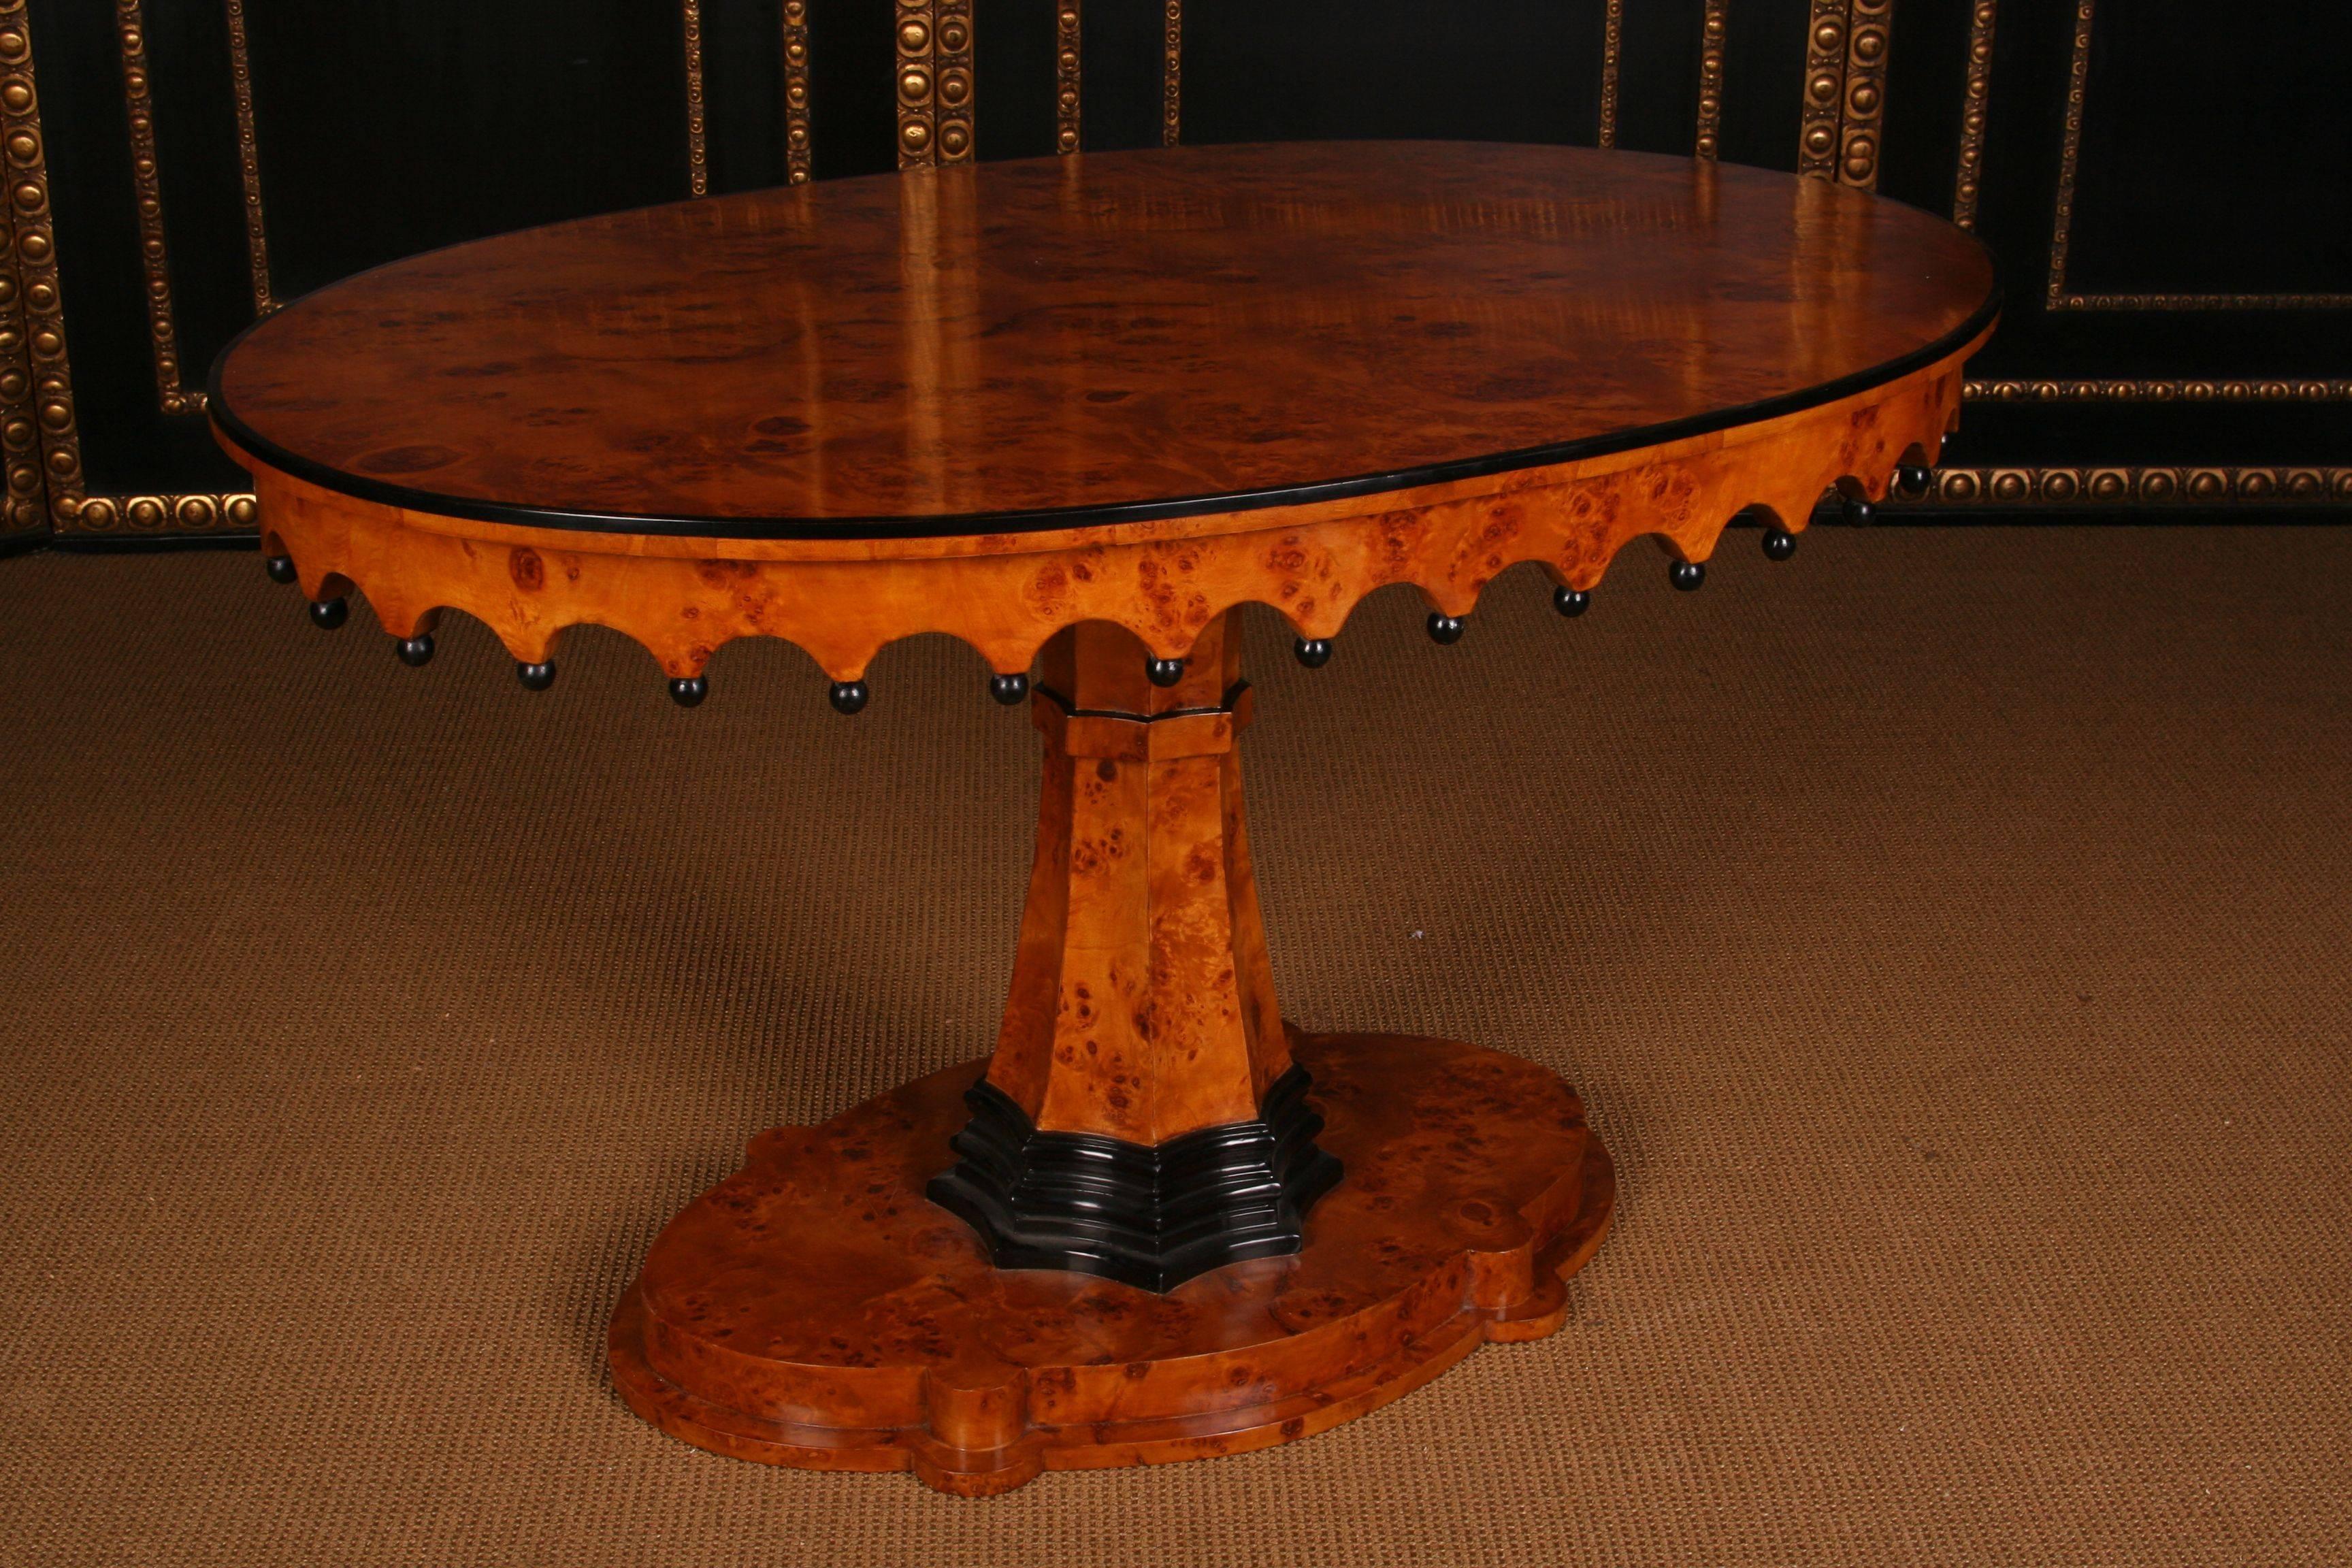 20th century Biedermeier style wood oval table
Exceptionally pretty oval table in Biedermeier style.
Bird's-eye maple on solid wood, partially blackened. Oval cambered and profiled pedestal. Middle ascending, eight cornered fan-shaped column